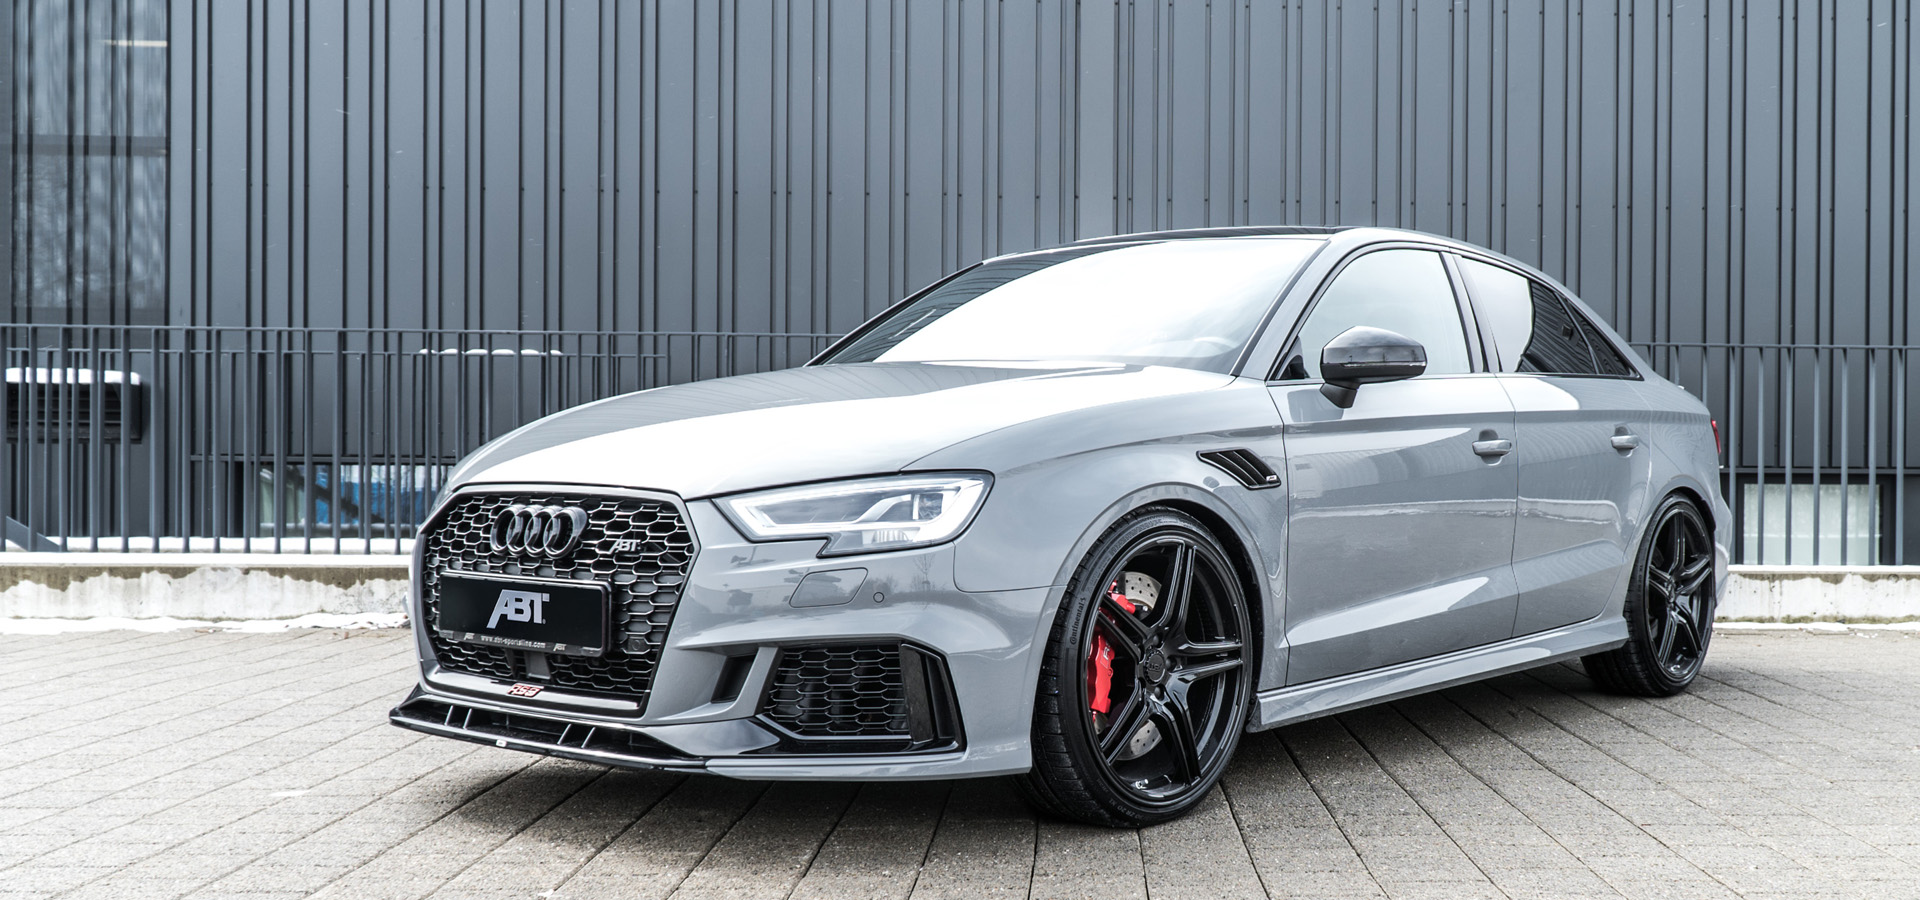 ABT gives Golf VIII R and co. the perfect swing - Audi Tuning, VW